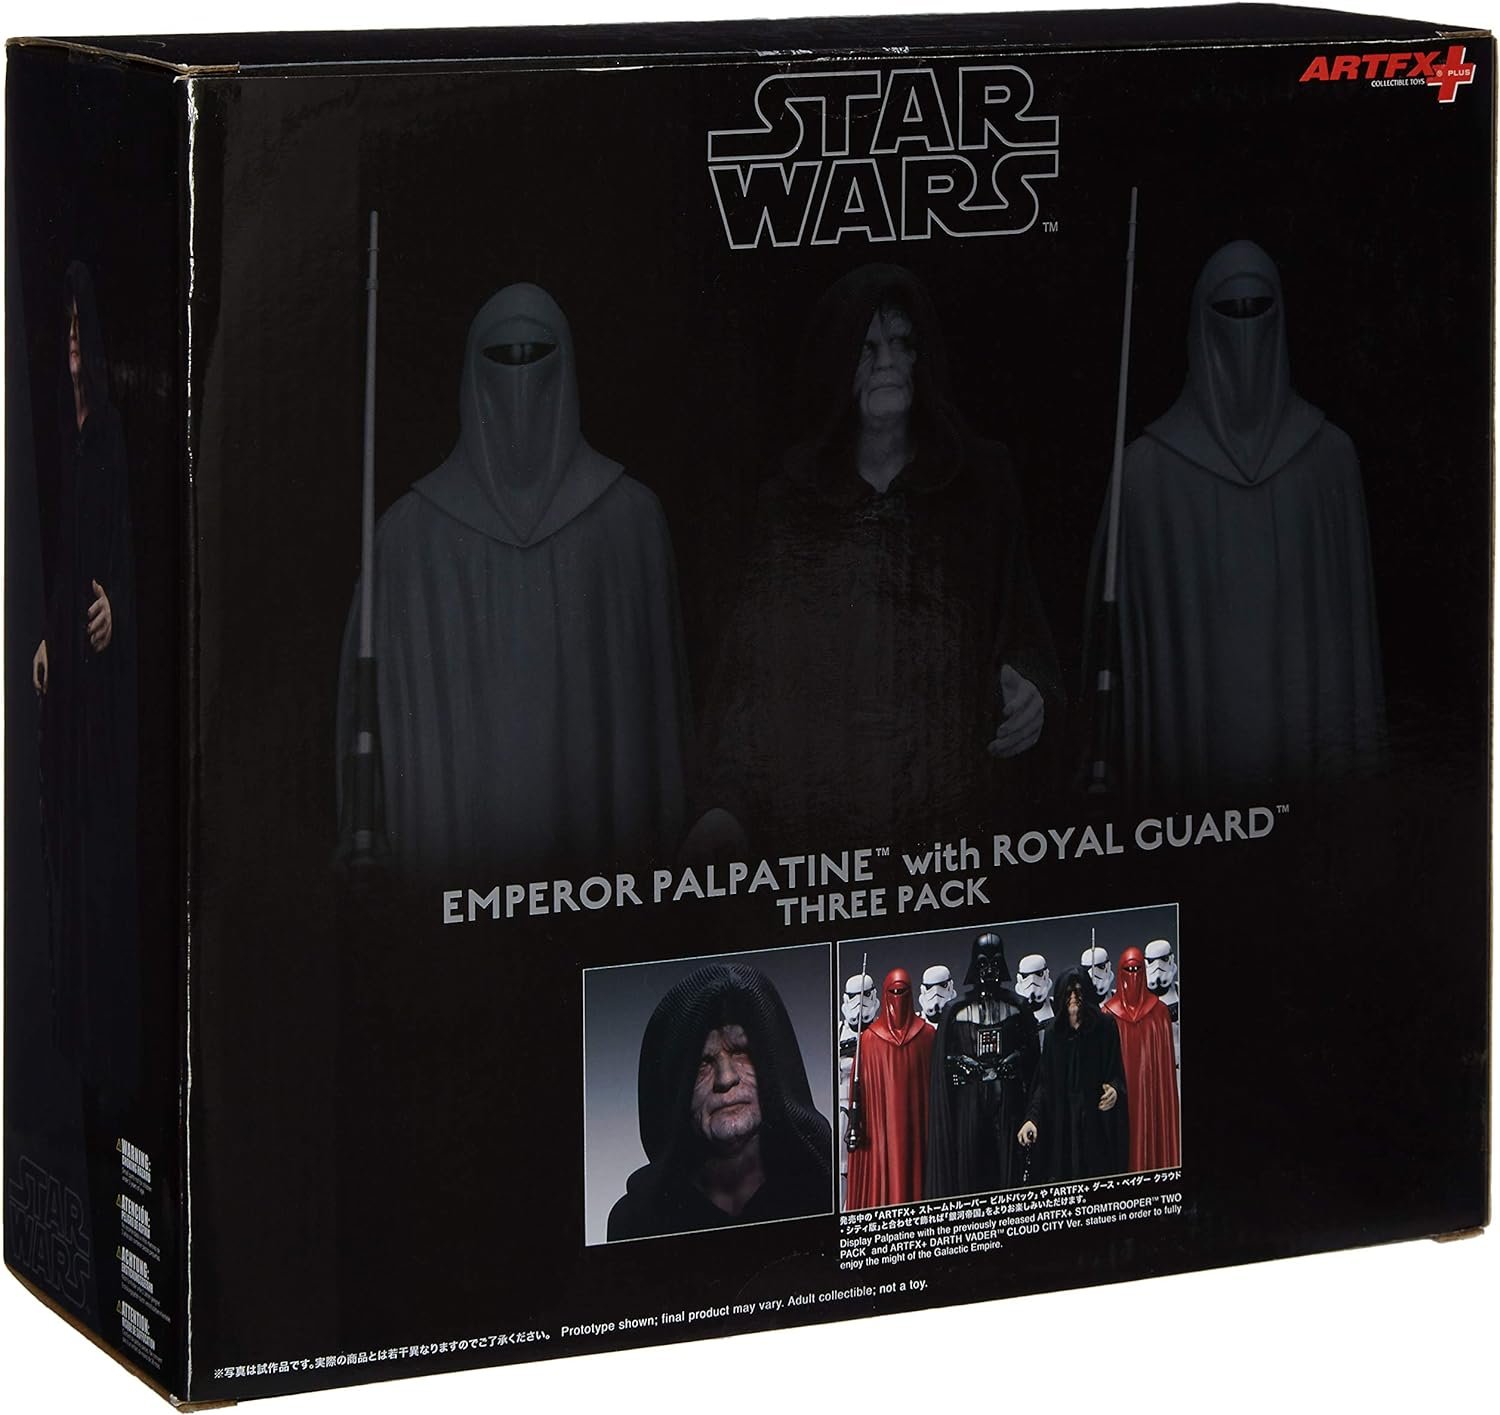 Star Wars Emperor Palpatine Royal and Guard 3 Pack image 2